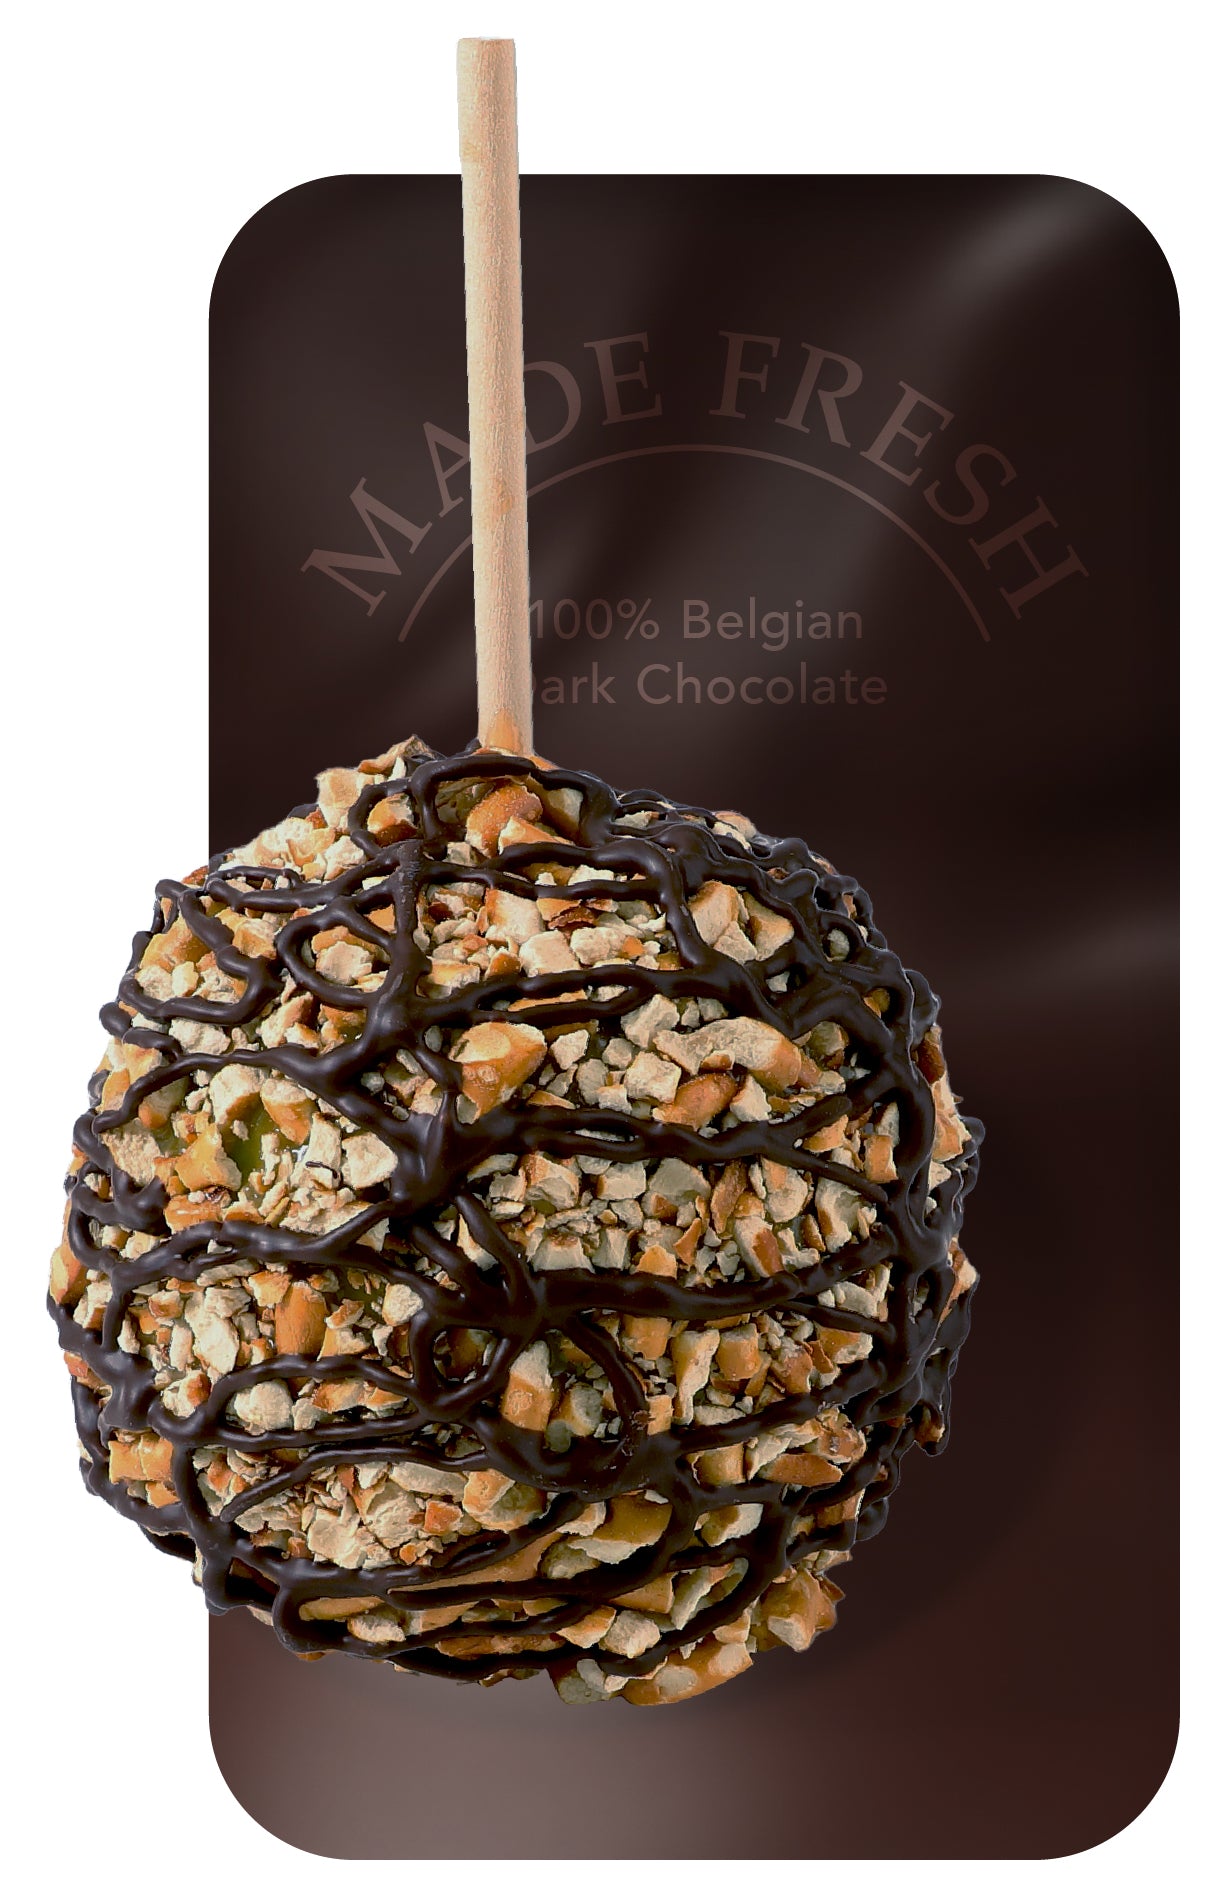 Caramel Apple with Pretzel and Dark Belgian Drizzle